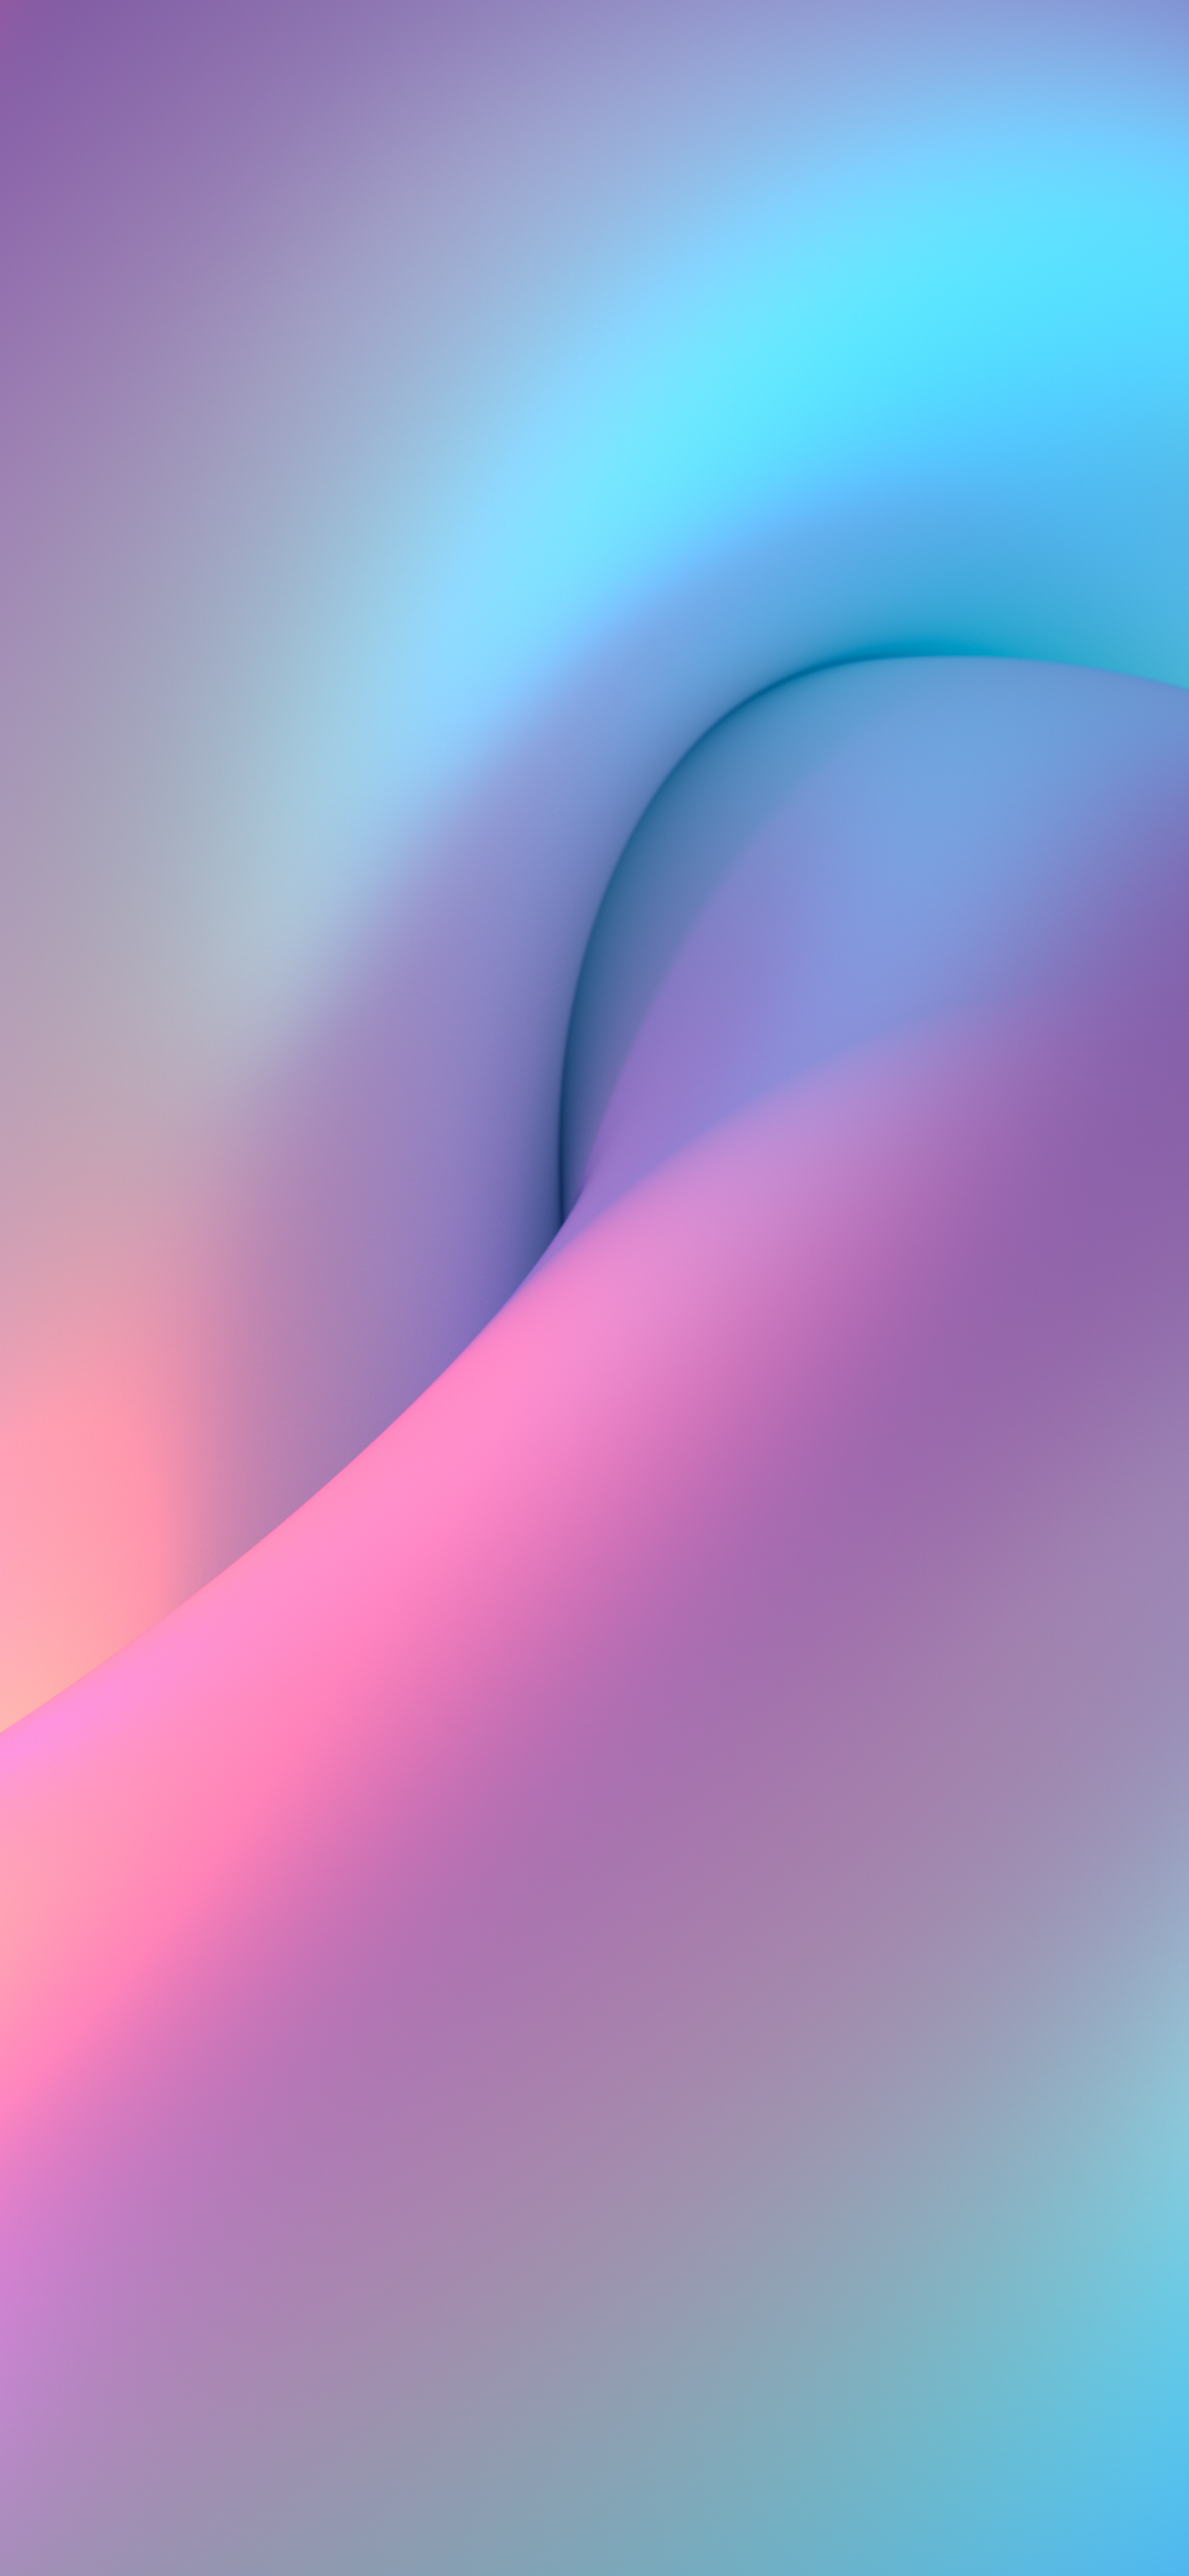 Free download iPhone X Wallpapers from Design Team Album on Imgur  [1200x2600] for your Desktop, Mobile & Tablet | Explore 27+ IPhone X  Wallpapers | X Files iPhone Wallpaper, iPhone X Wallpaper,